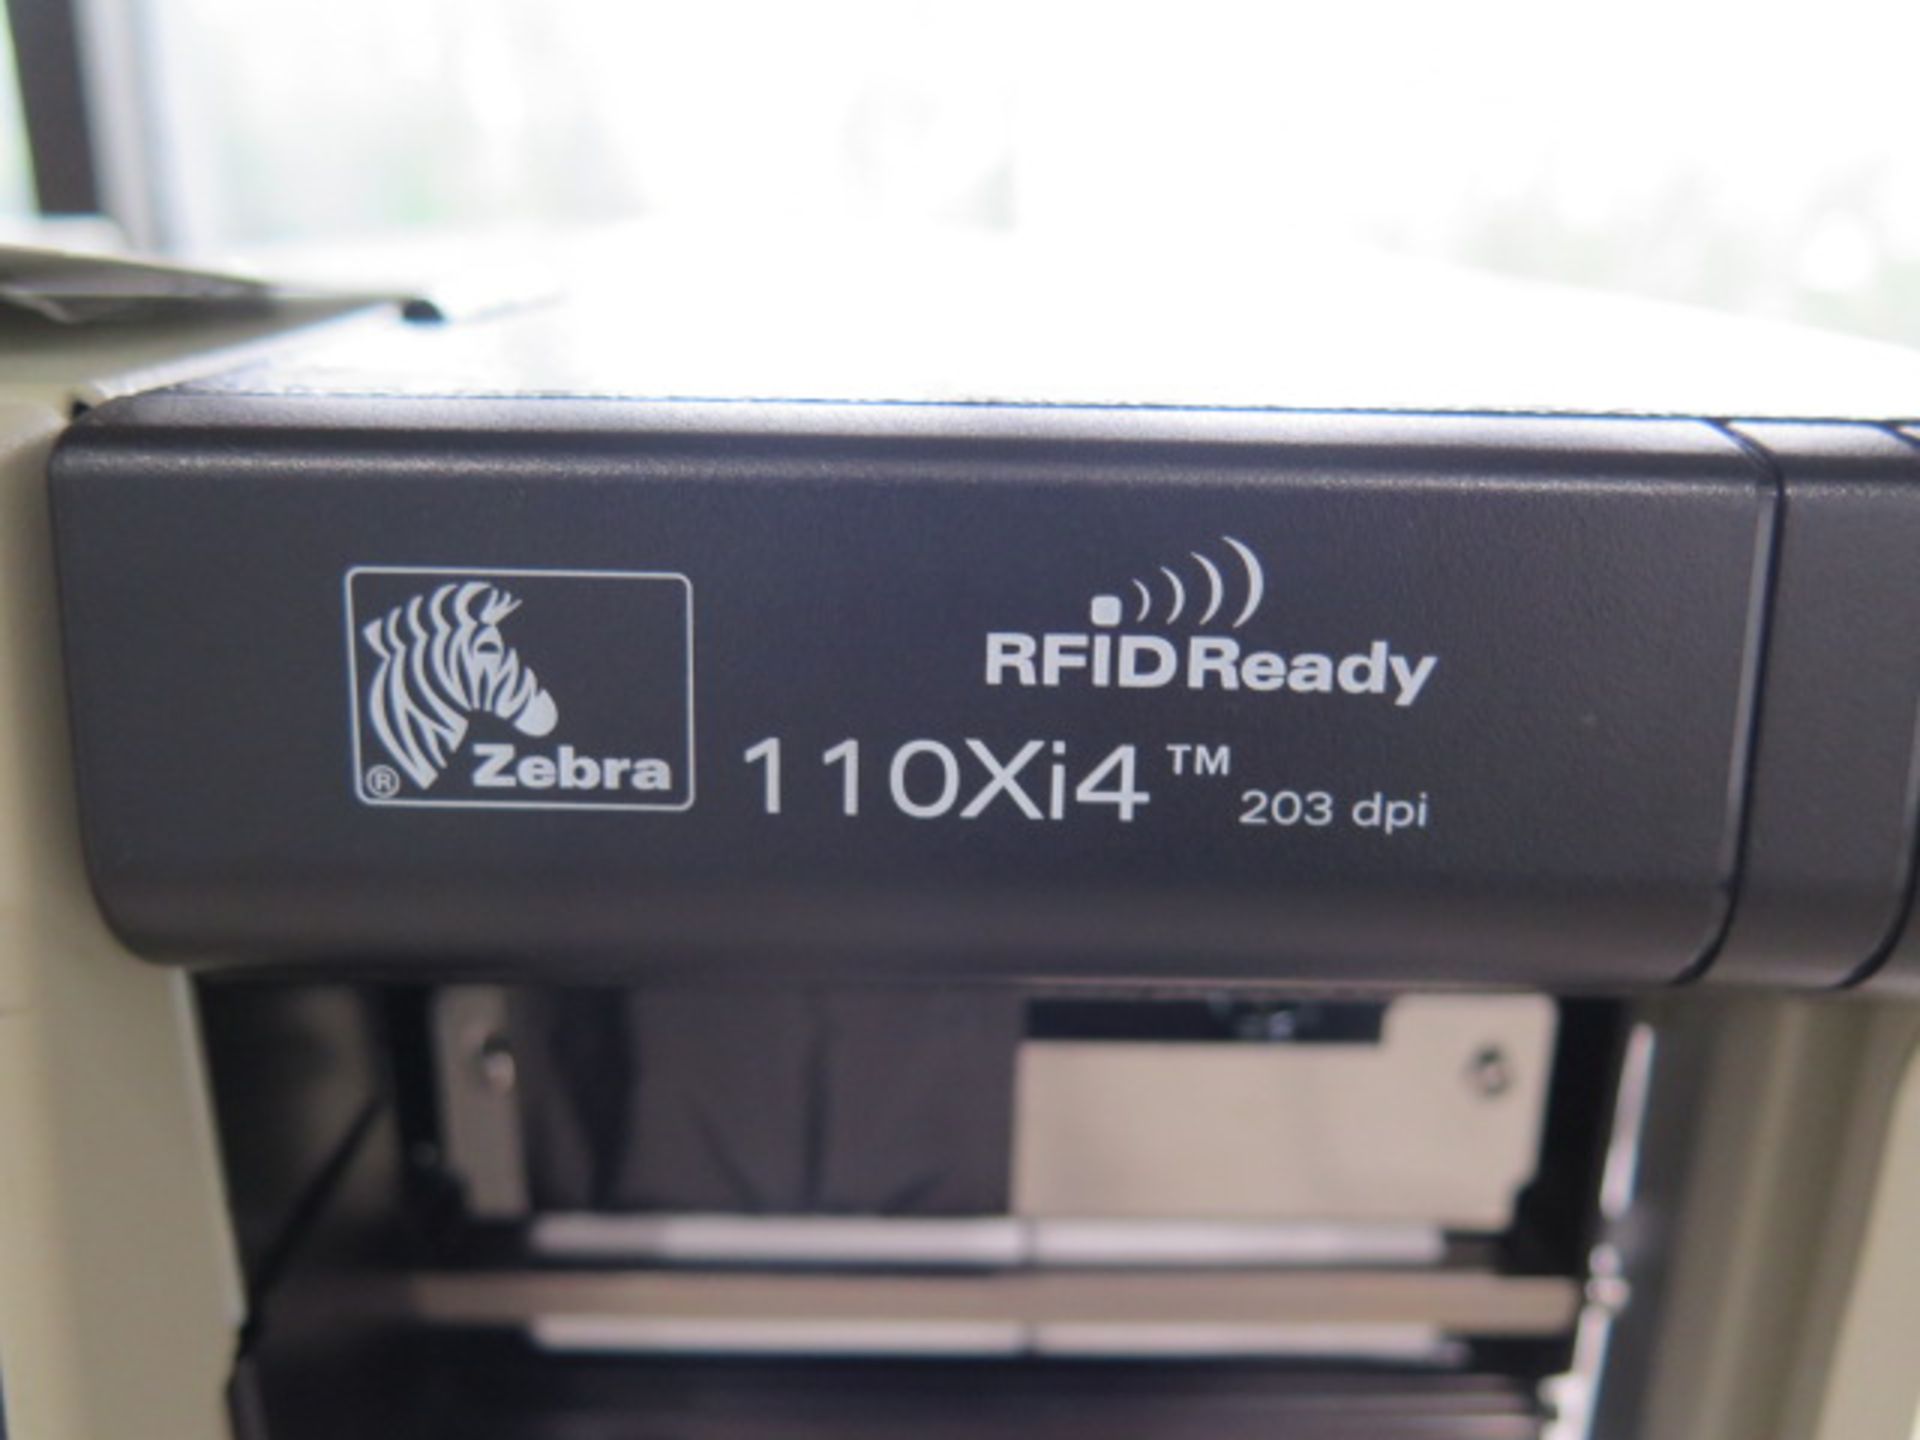 Zebra 110Xi4 Label Printer RFID Ready (SOLD AS-IS - NO WARRANTY) - Image 5 of 5